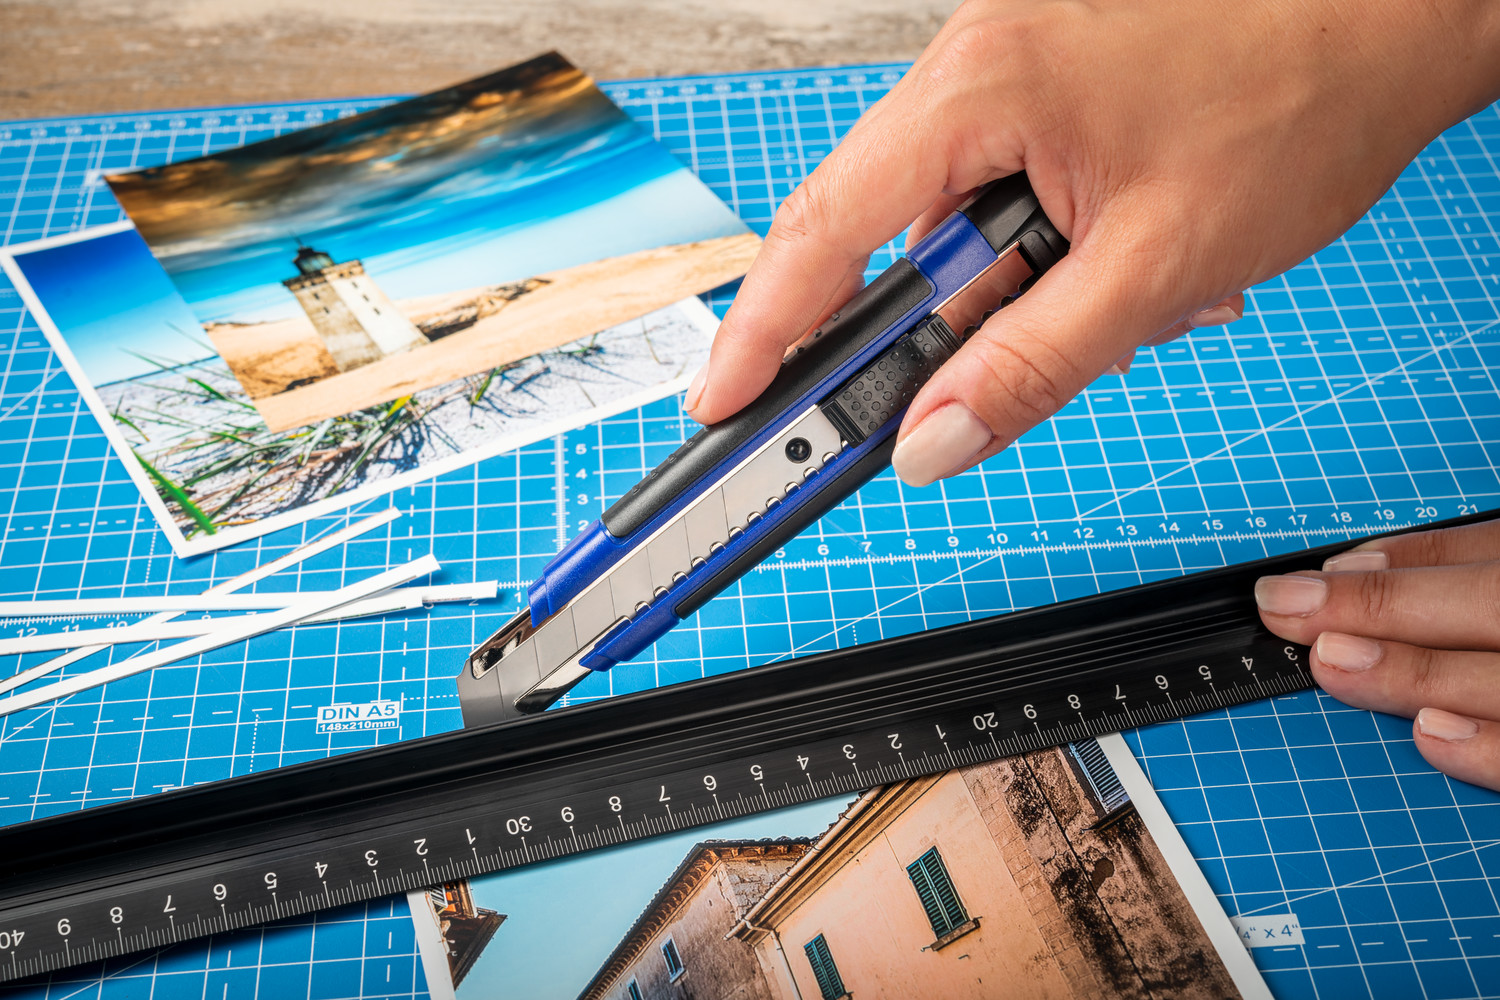 Universal use: DAHLE Allround cutters are ideal for household use, home improvement or your next DIY project